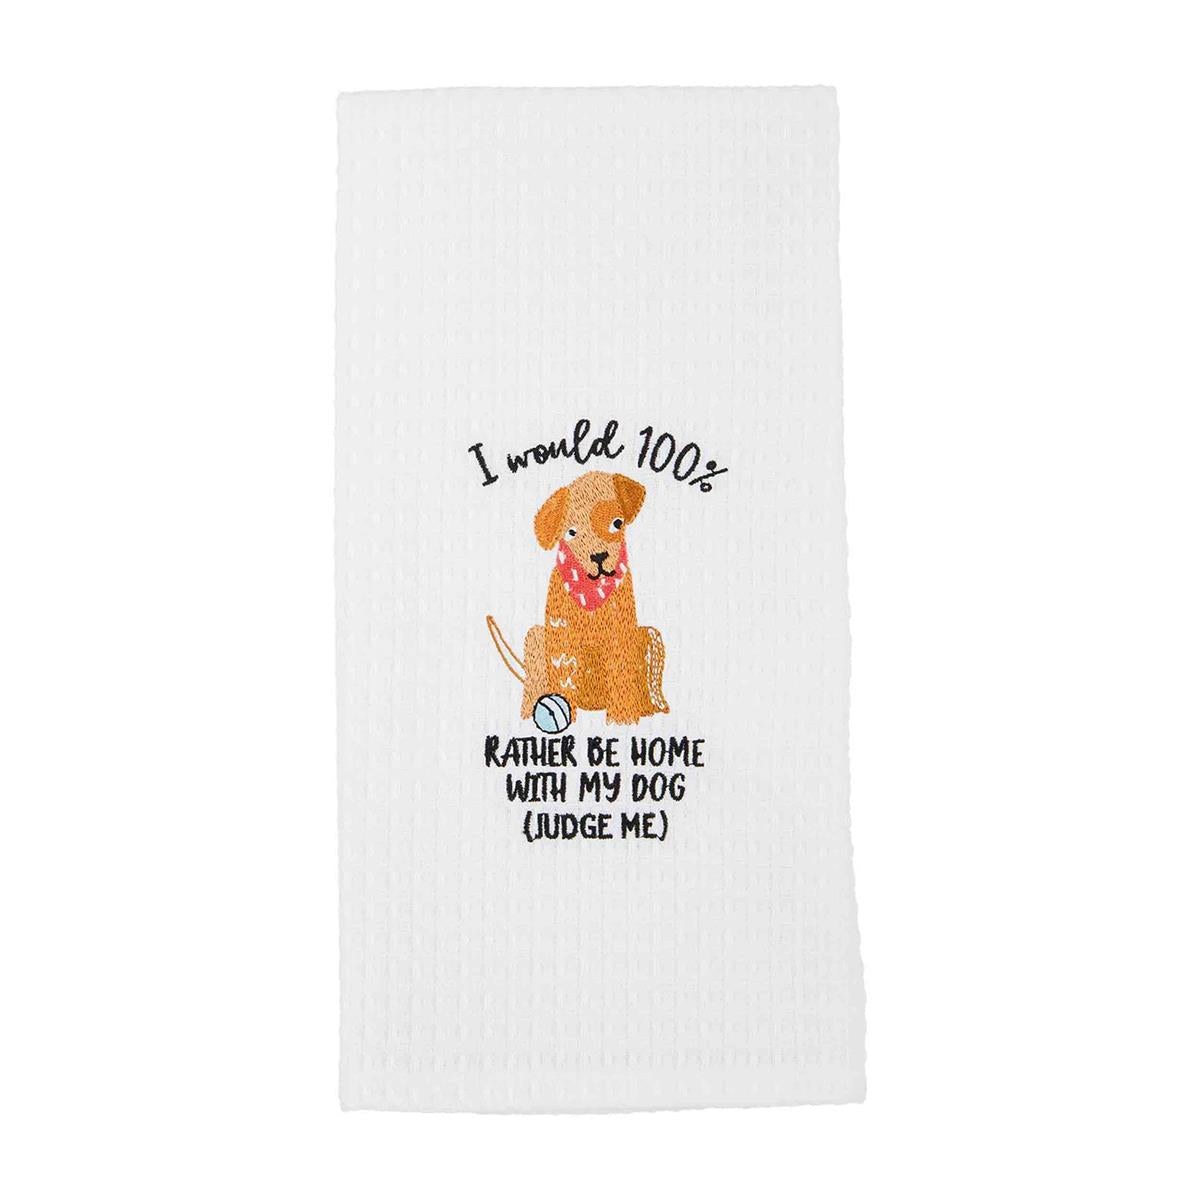 white dish towel with embroidered dog and "i would 100% rather be home with my dog, judge me" embroidered on it.